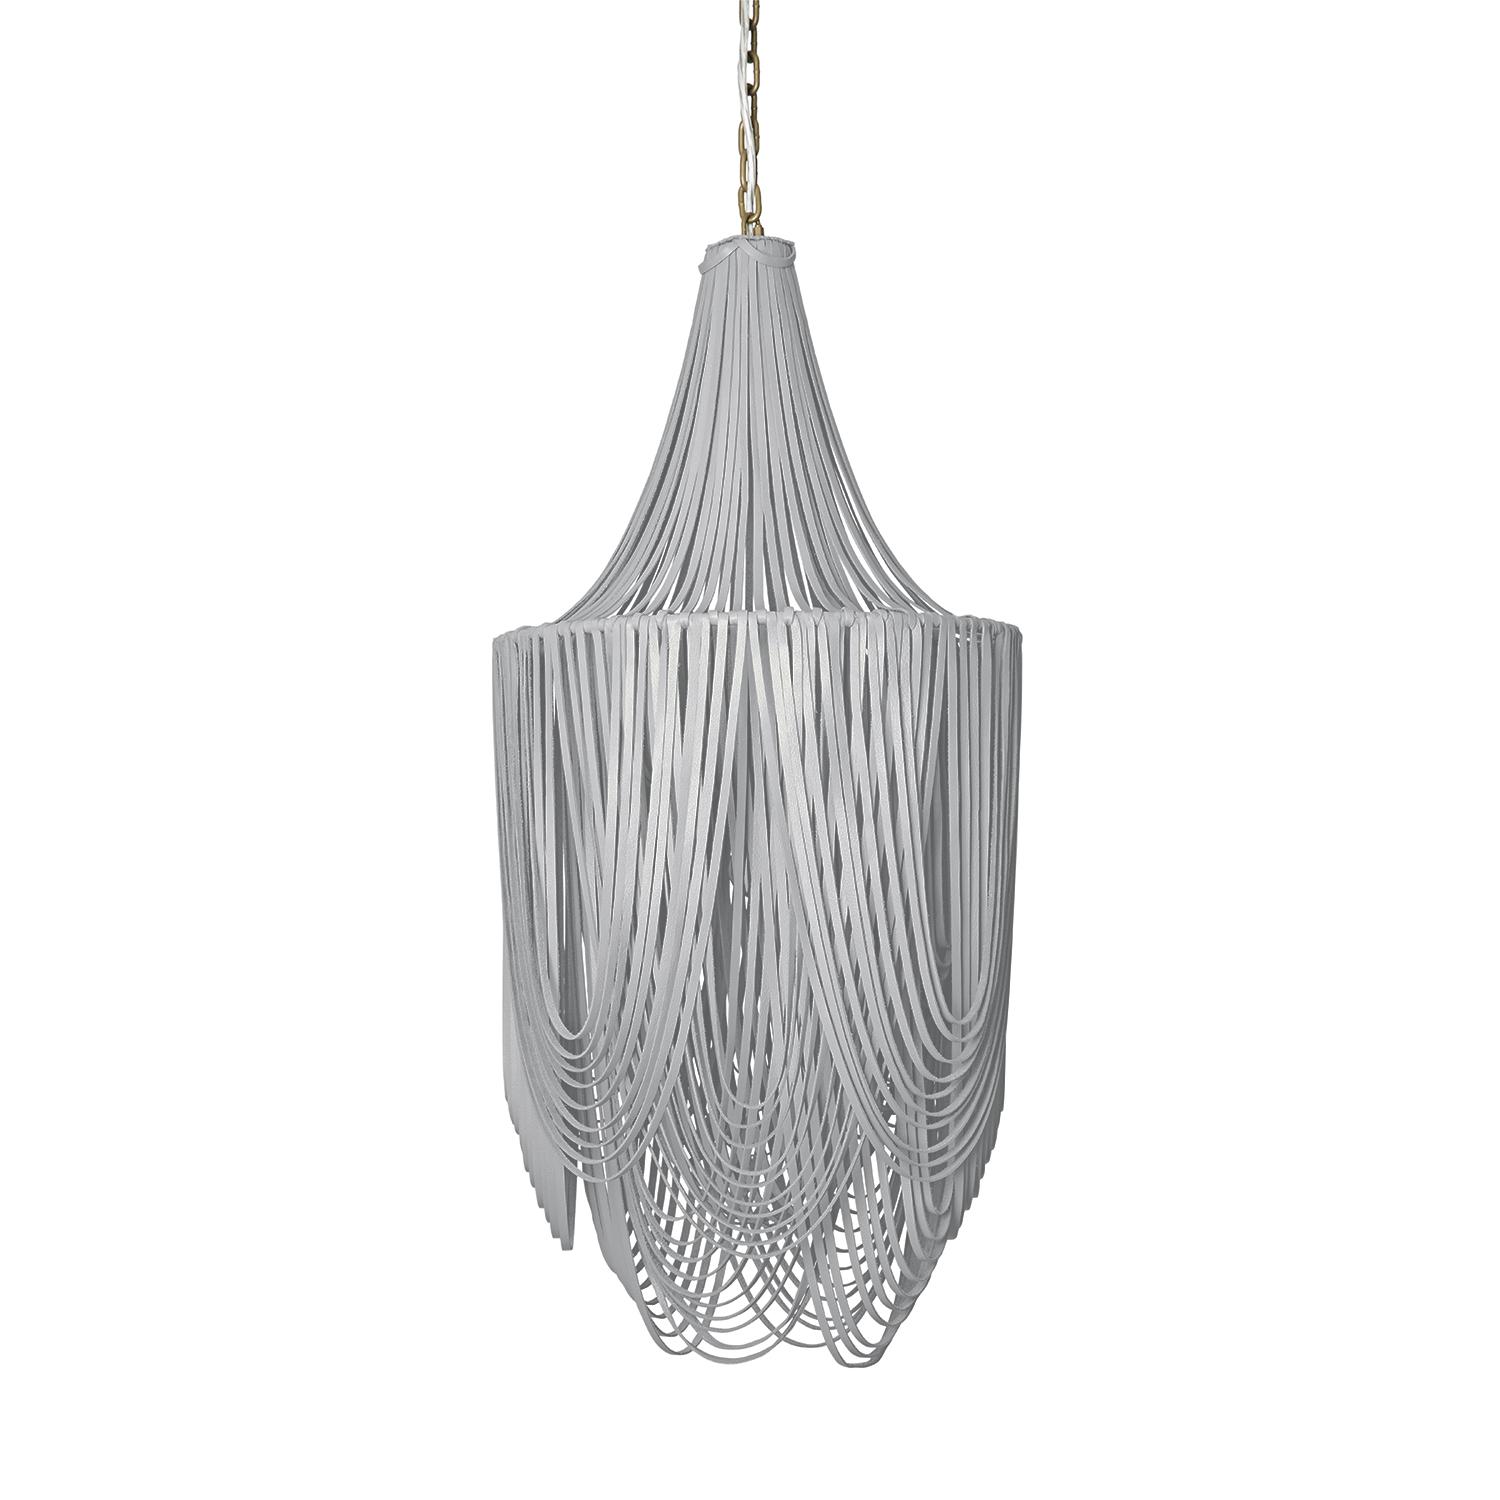 Small Round Whisper with Crown Leather Chandelier in Metallic Leather